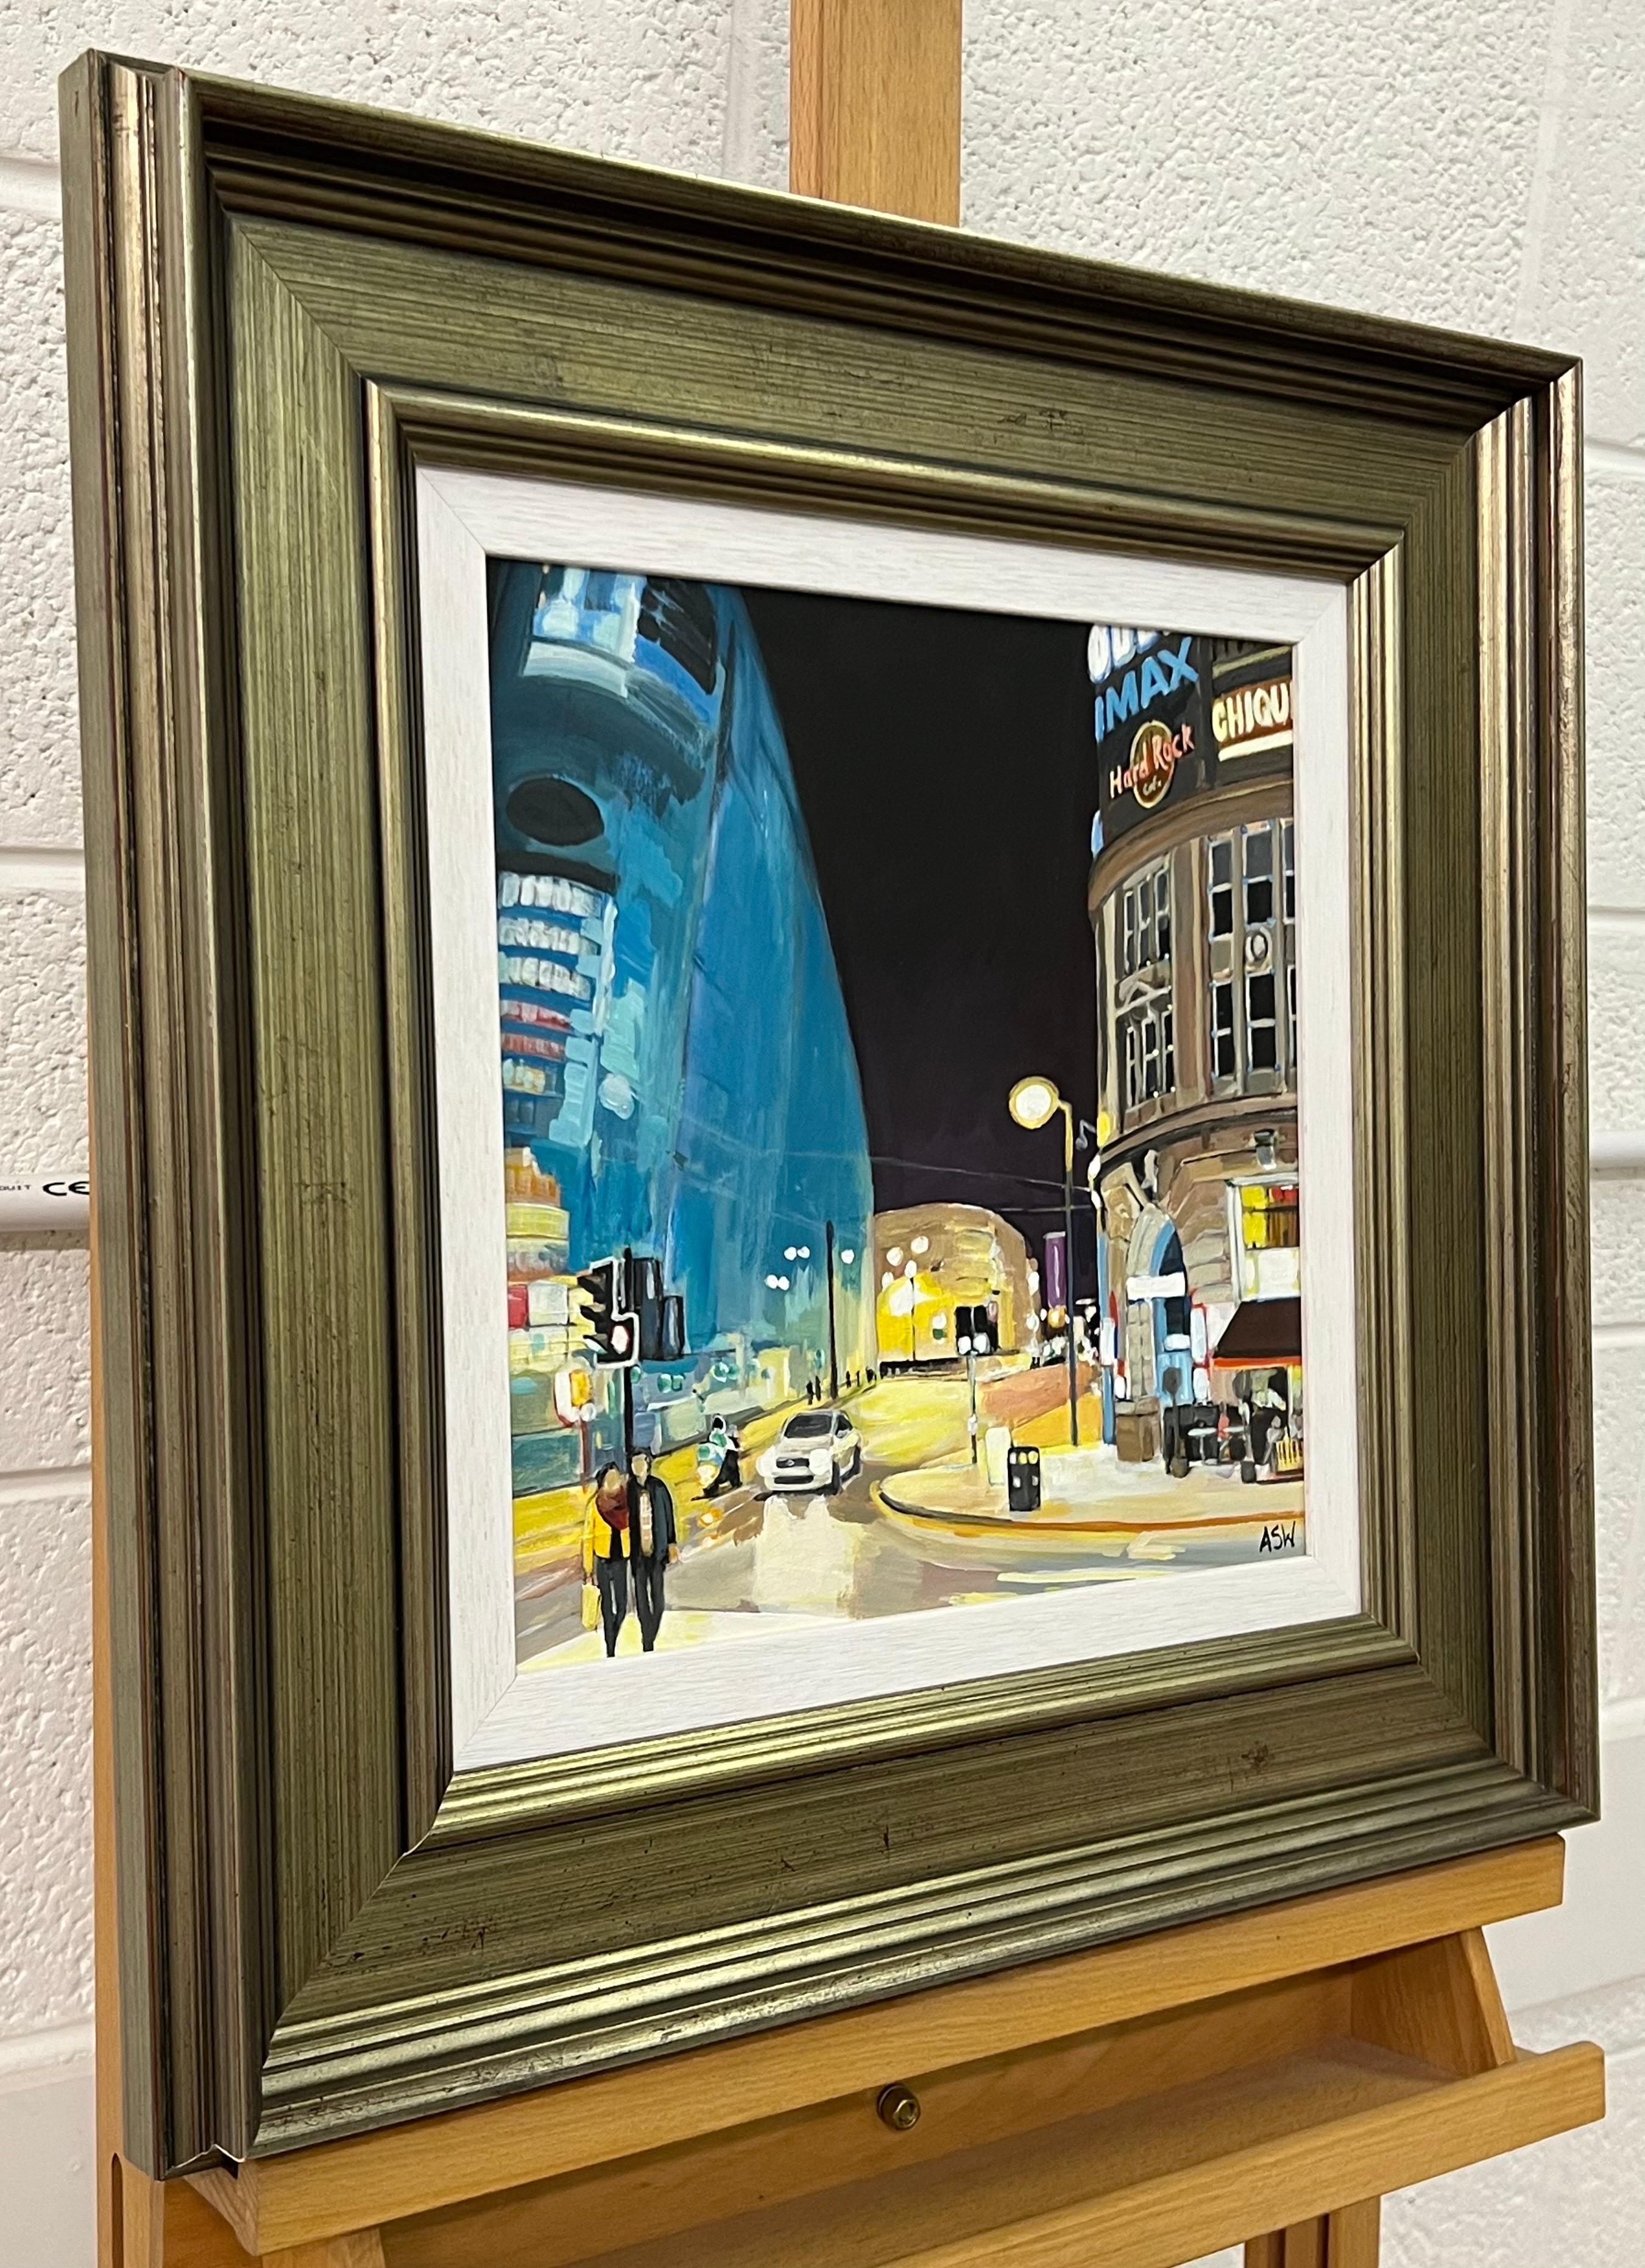 Urbis at Night in Manchester City by Contemporary British Urban Landscape Artist - Painting by Angela Wakefield